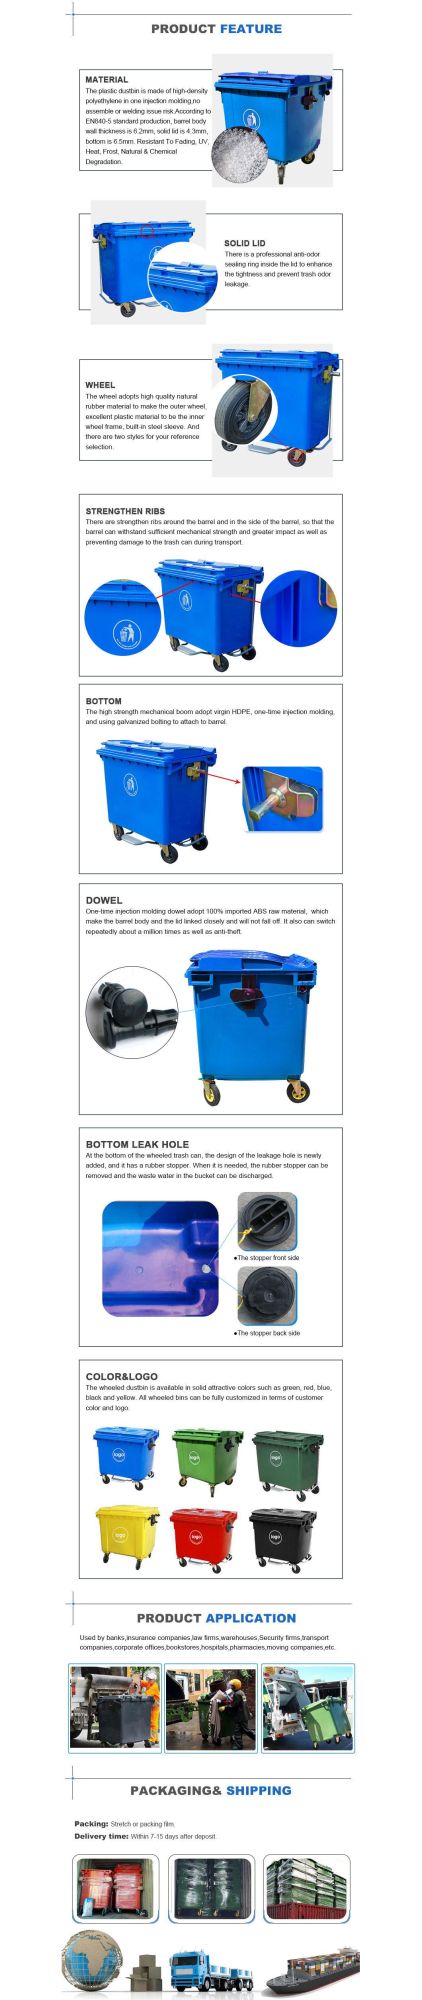 Customized Types of Waste Bin for Disposable Glass 1100L